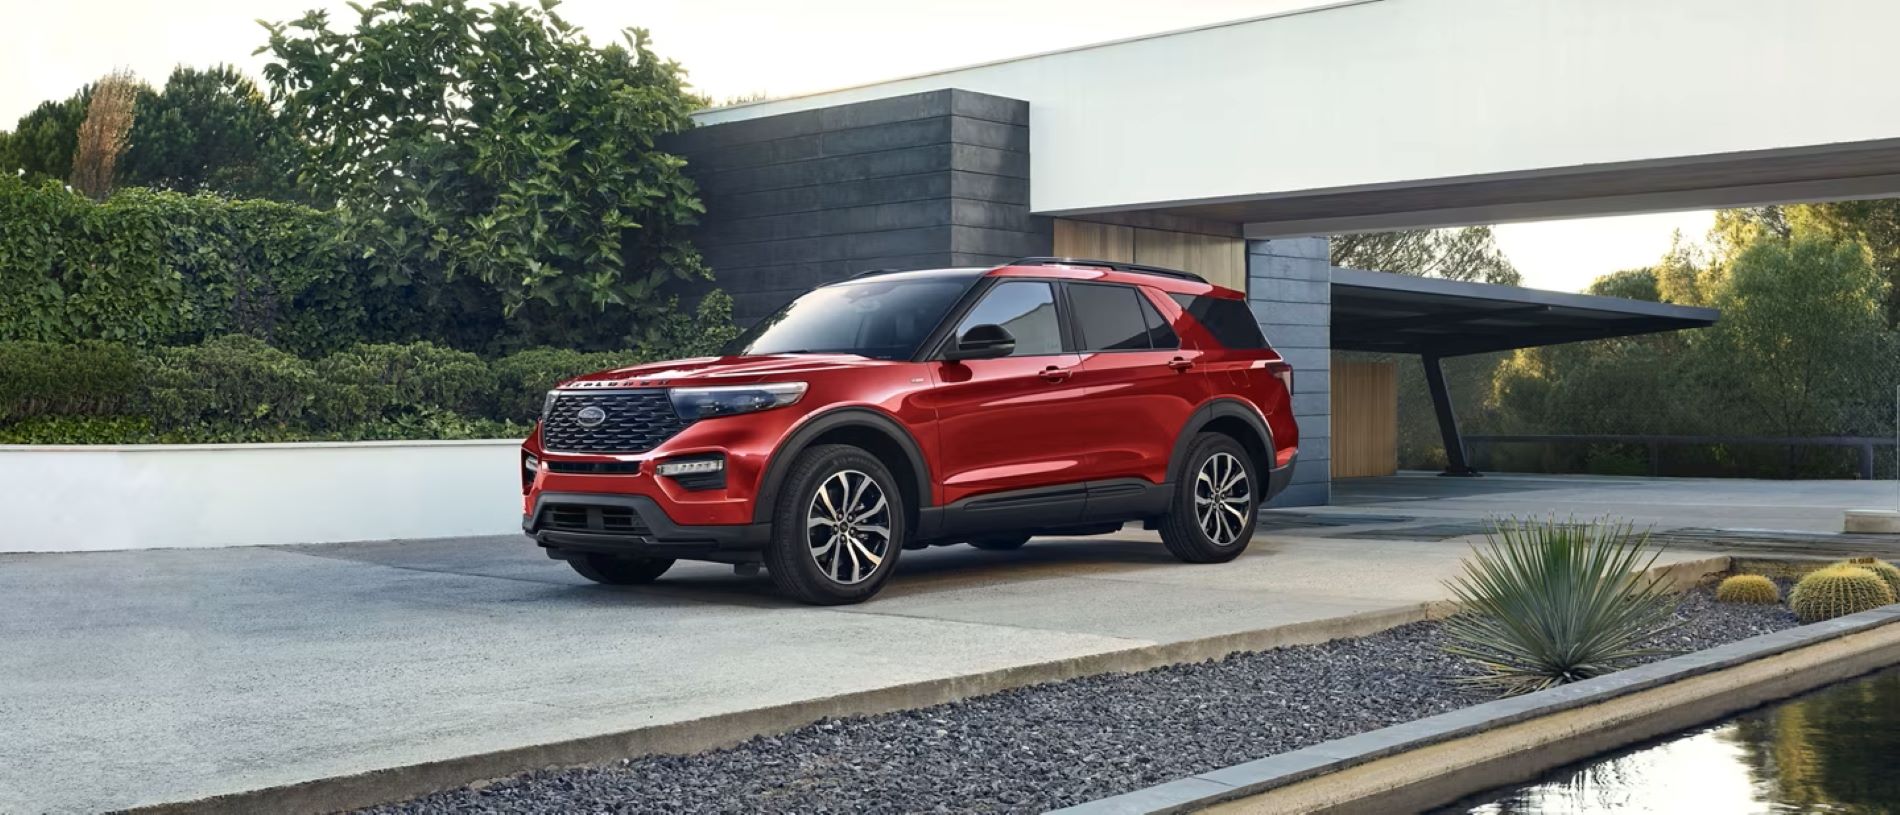 Ford Explorers also come with XLT sport appearance package, universal garage door opener, ten spoke aluminum wheels, cargo area management system, heated second row seats, and rear cross traffic alert.